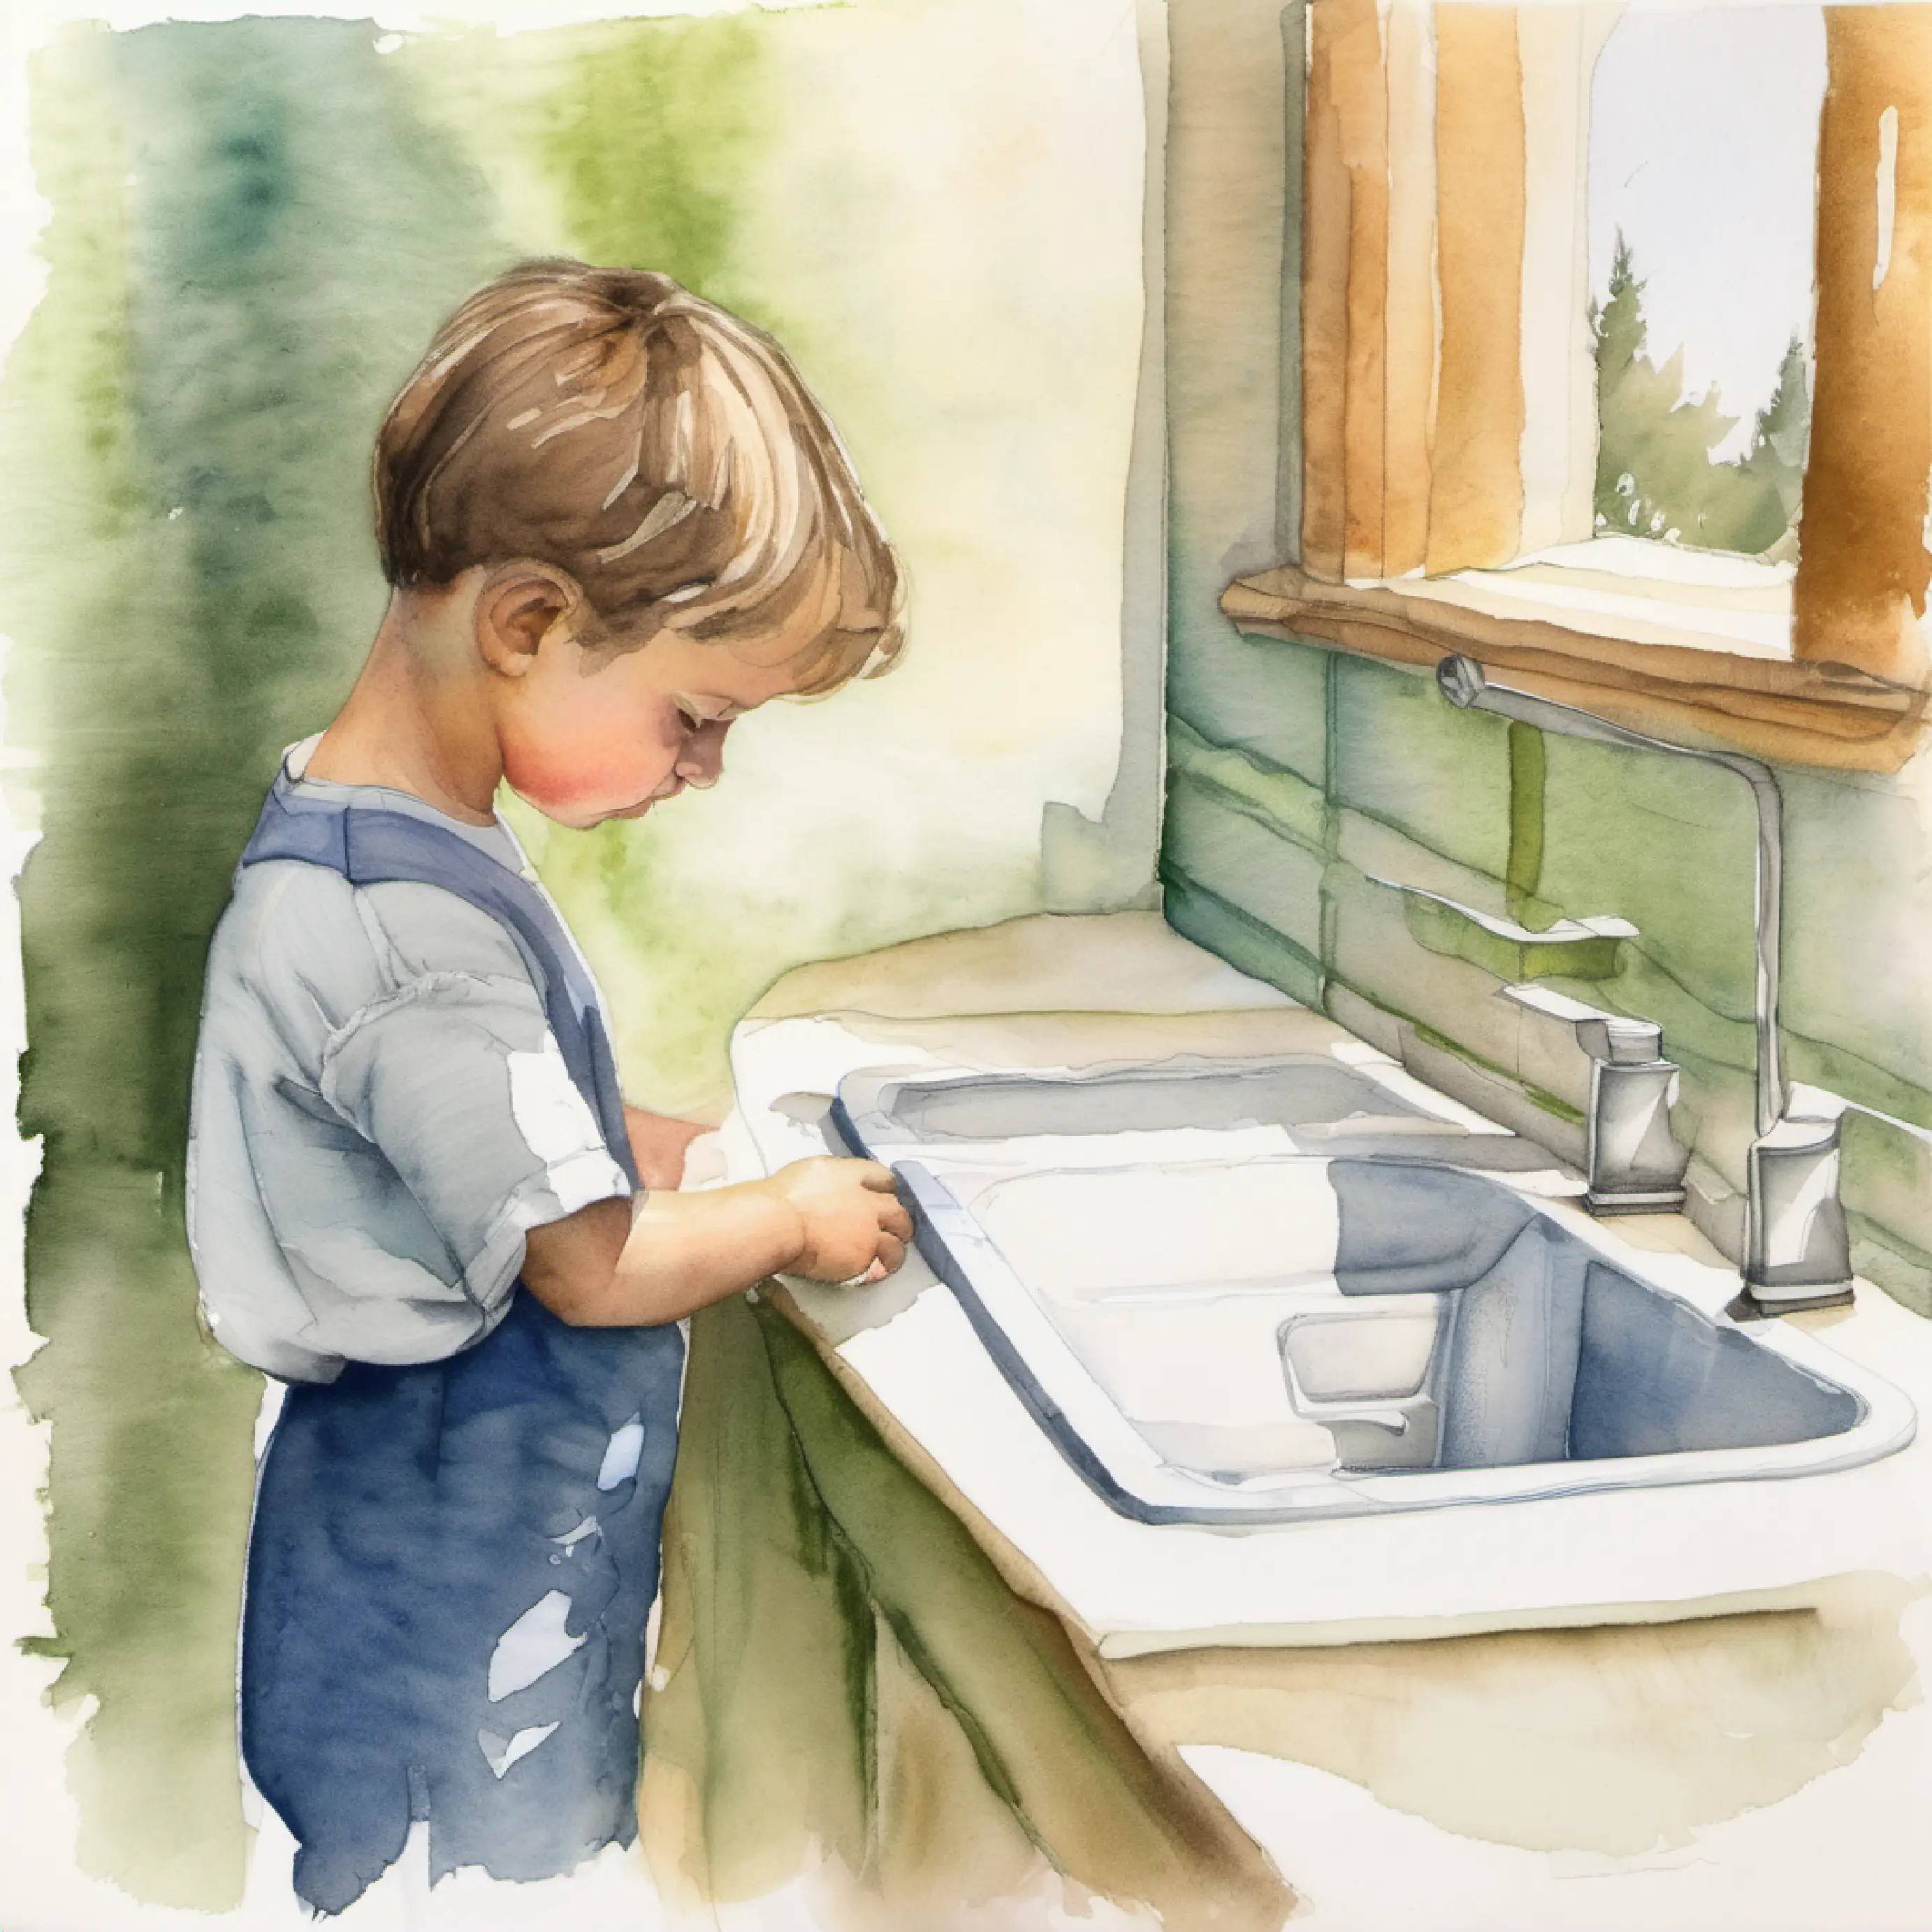 Child pondering the importance of washing hands.